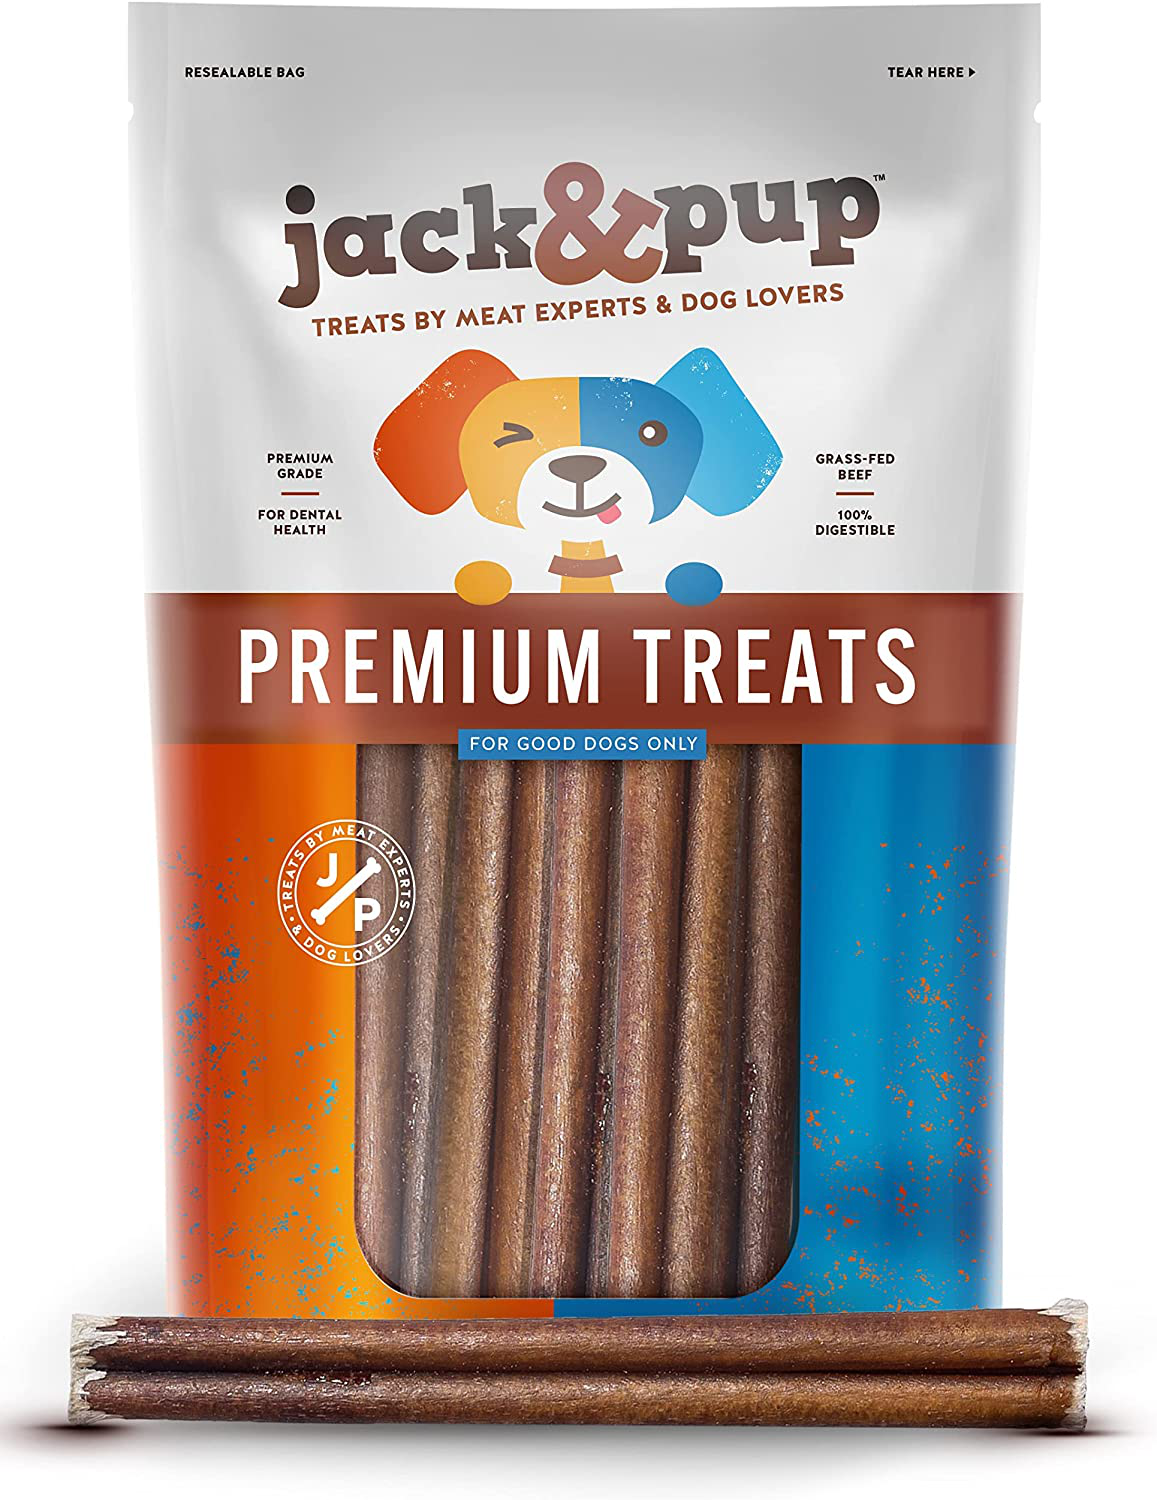 Jack&Pup Premium 6 Inch Thick Bully Sticks for Medium Dogs, Dog Bully Sticks for Small Dogs -6" Bully Sticks for Puppies Natural Bully Sticks Odor Free Long Lasting Dog Chews, Beef Bully Stick (5 Pk) Animals & Pet Supplies > Pet Supplies > Dog Supplies > Dog Treats Jack & Pup   